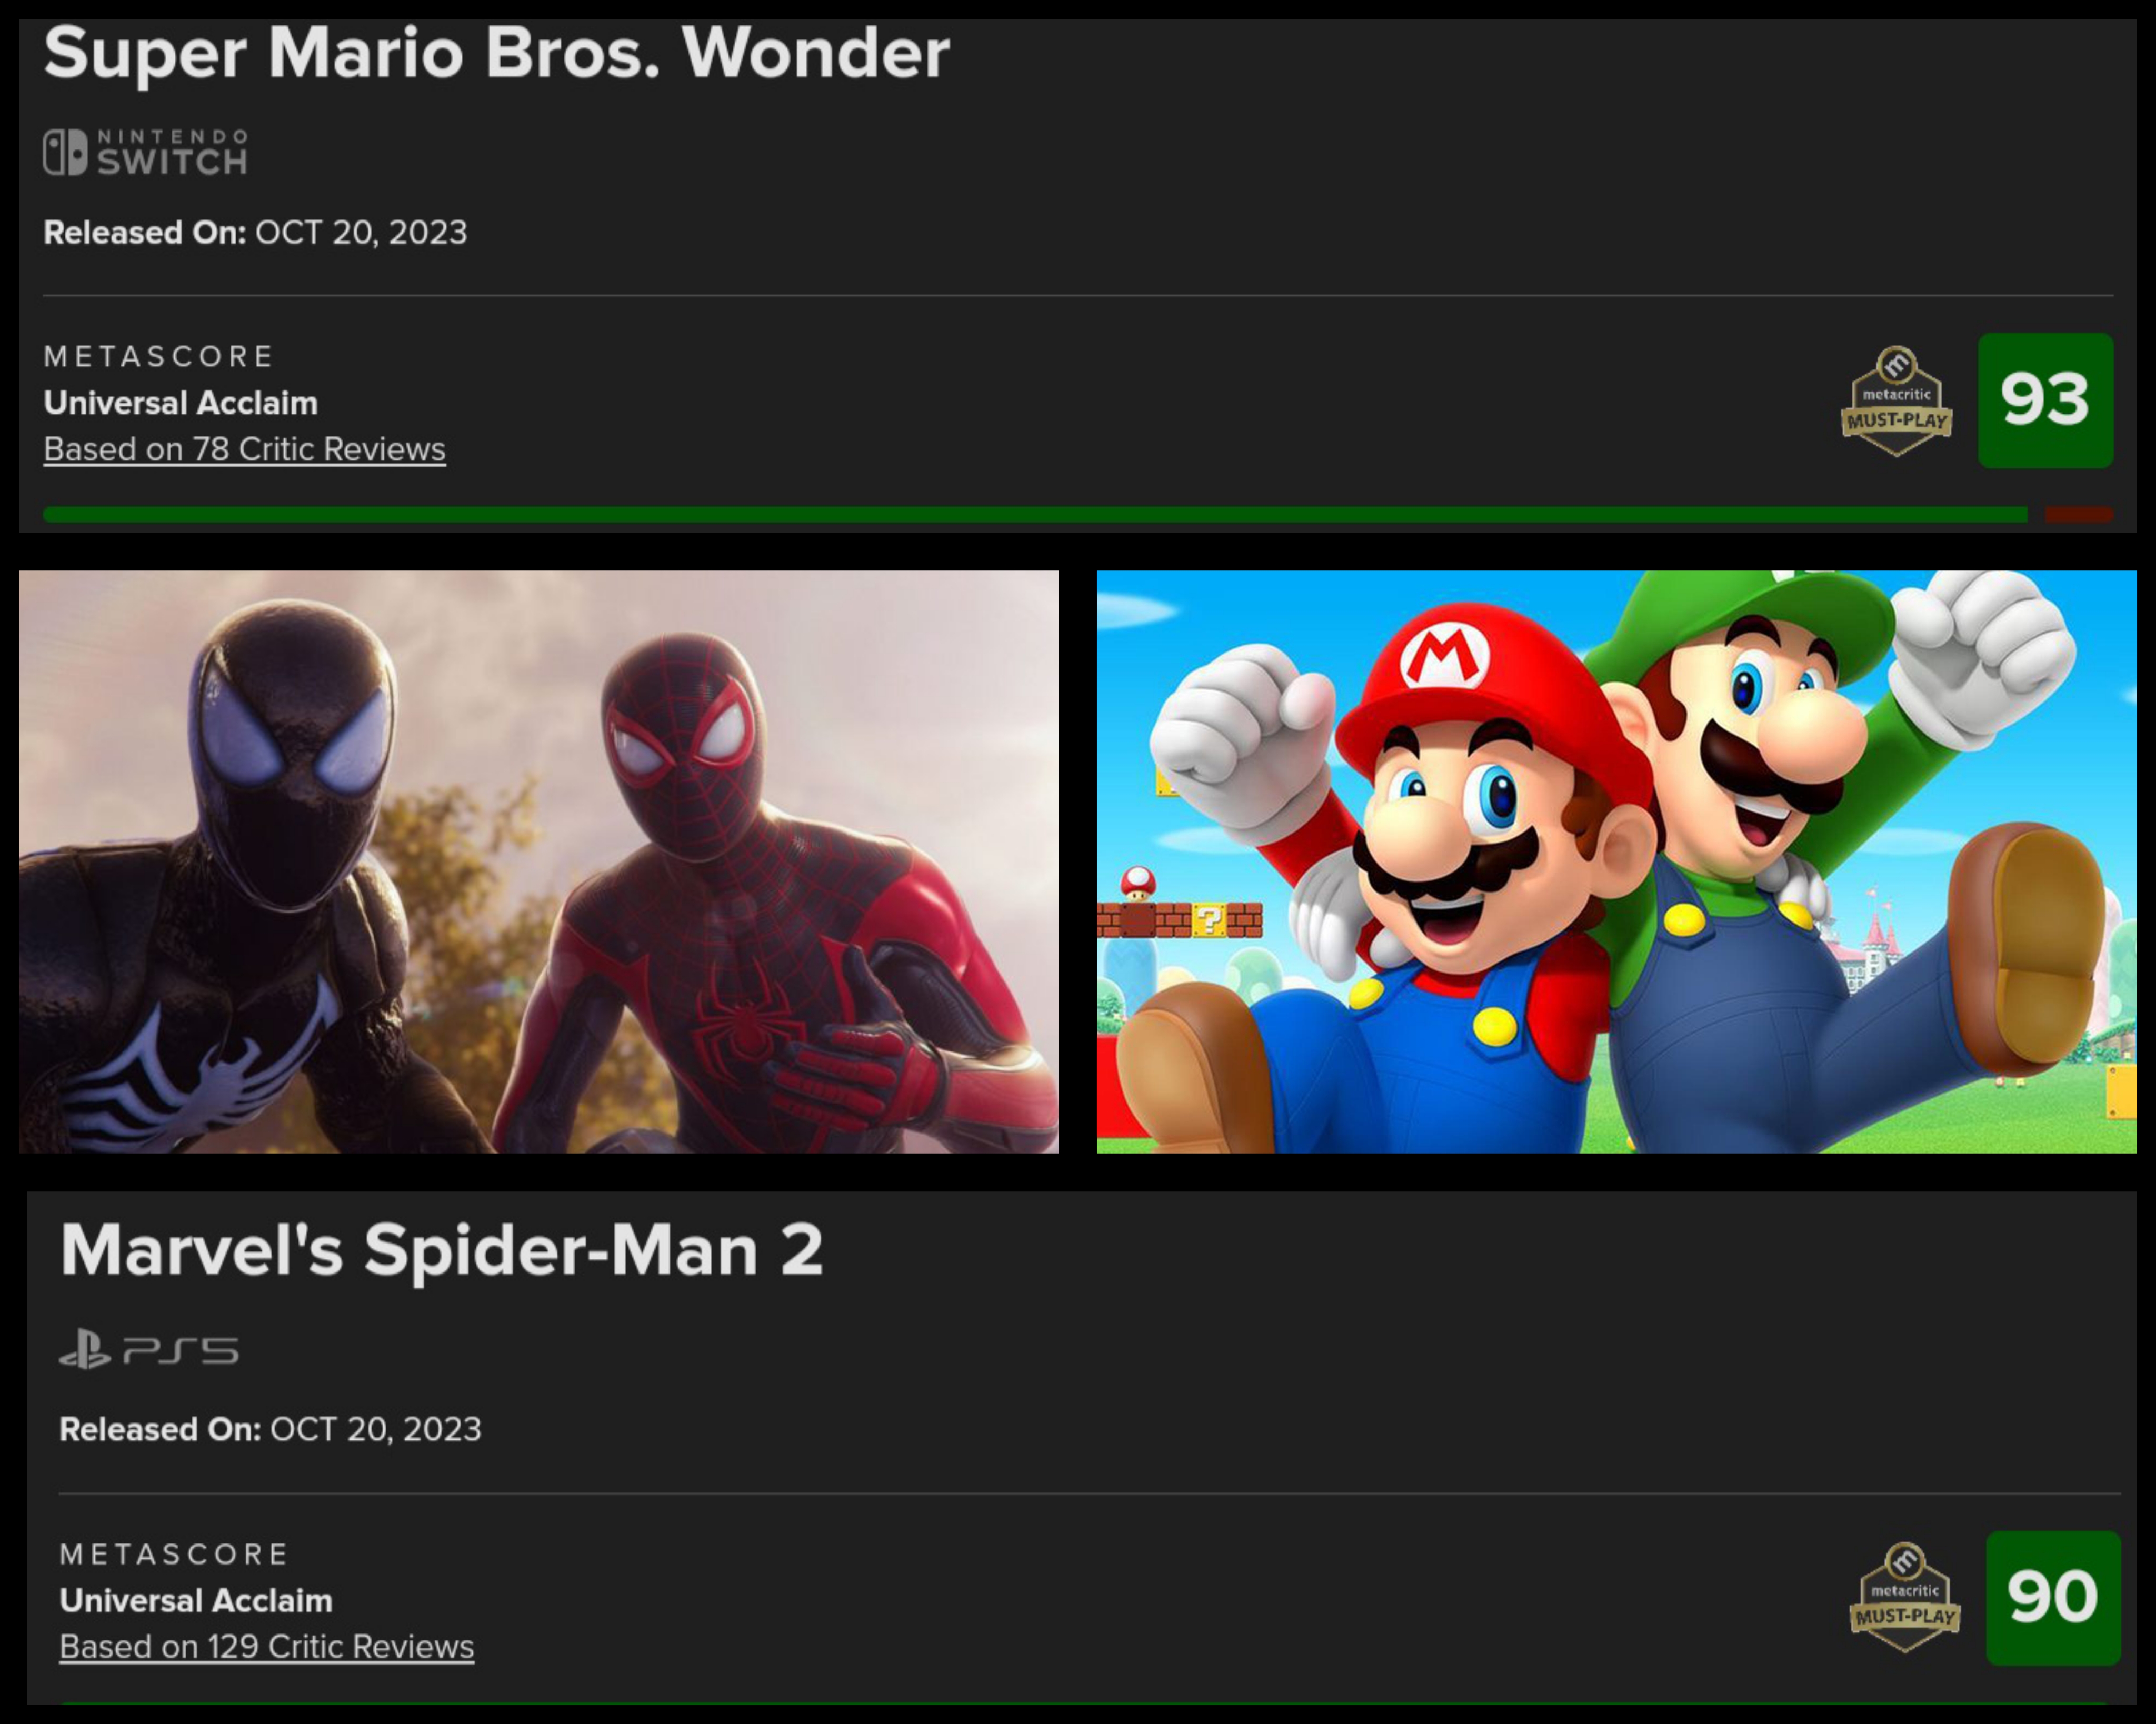 Super Mario Bros. Wonder Achieves High Metacritic Score, More Than Marvel's  Spider-Man 2, and MORE